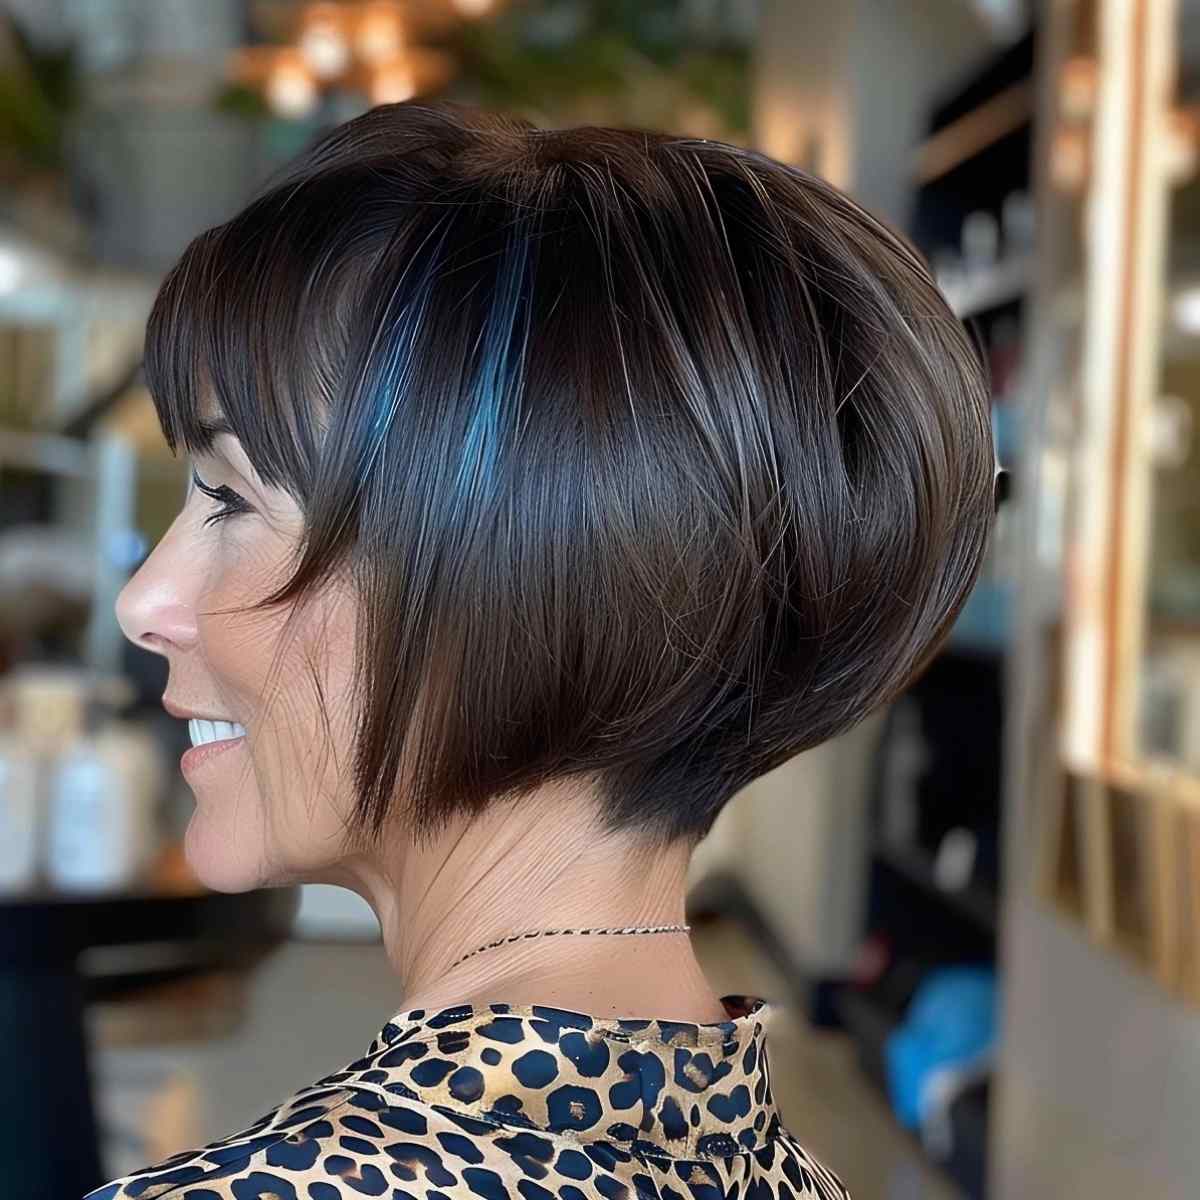 Short Undercut and Stacked Bob with Bangs